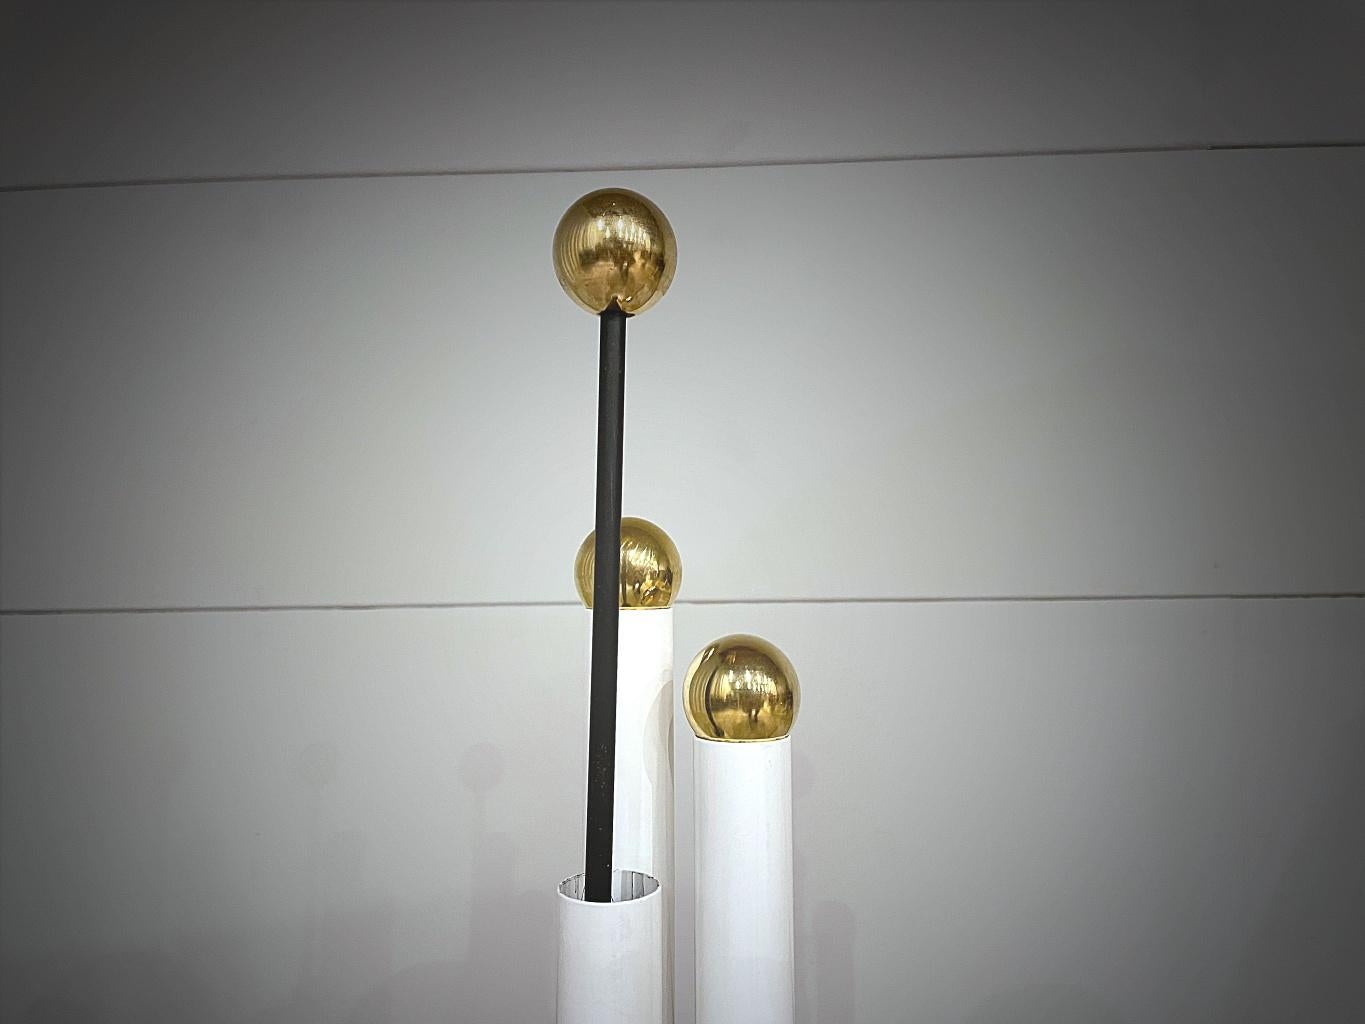 Lacquered Midcentury Modern Minimalistic Tower Brass & Steel Fireplace Tools, 1960s, Italy For Sale